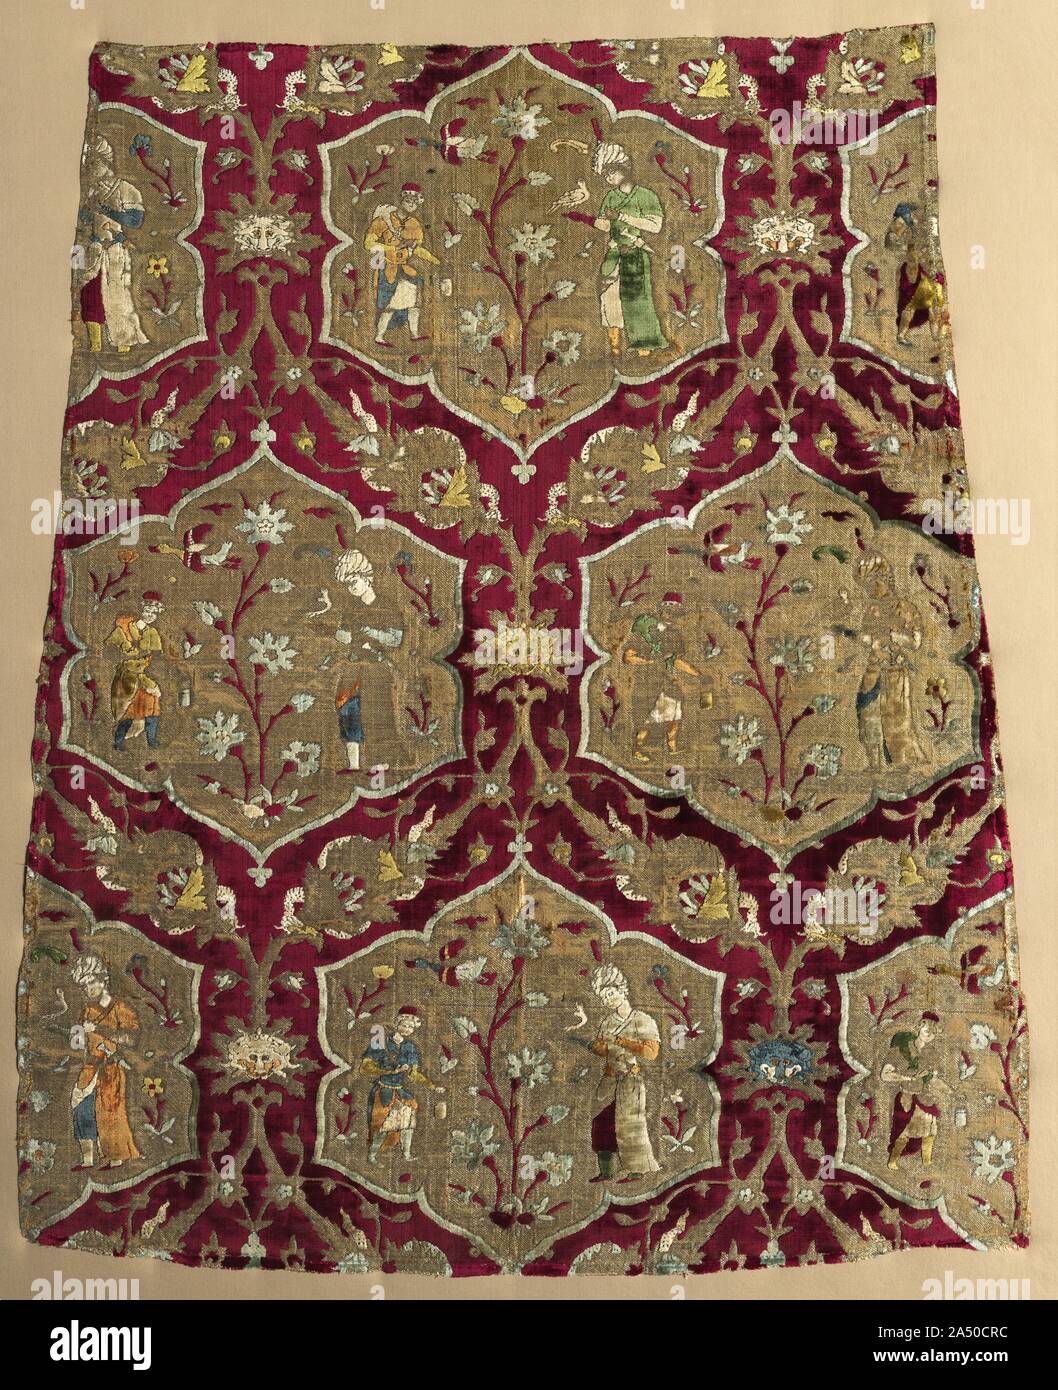 Brocaded velvet with falconer and attendant in animated lattice, from a robe, mid 1500s. This signature Safavid velvet displaying a falconry scene is celebrated for its refined beauty, meticulous draftsmanship, and exemplary technique with eight colours of velvet pile. A falconer and attendant flank a tall blossoming plant on a golden ground of lobed medallions. Animated foliate vines display leaves bearing lion&#x2019;s masks and dragons coiled around larger leaves on the rich crimson velvet ground. Instead of two or three colours of velvet pile, ingenious Iranian weavers wove velvets with as Stock Photo